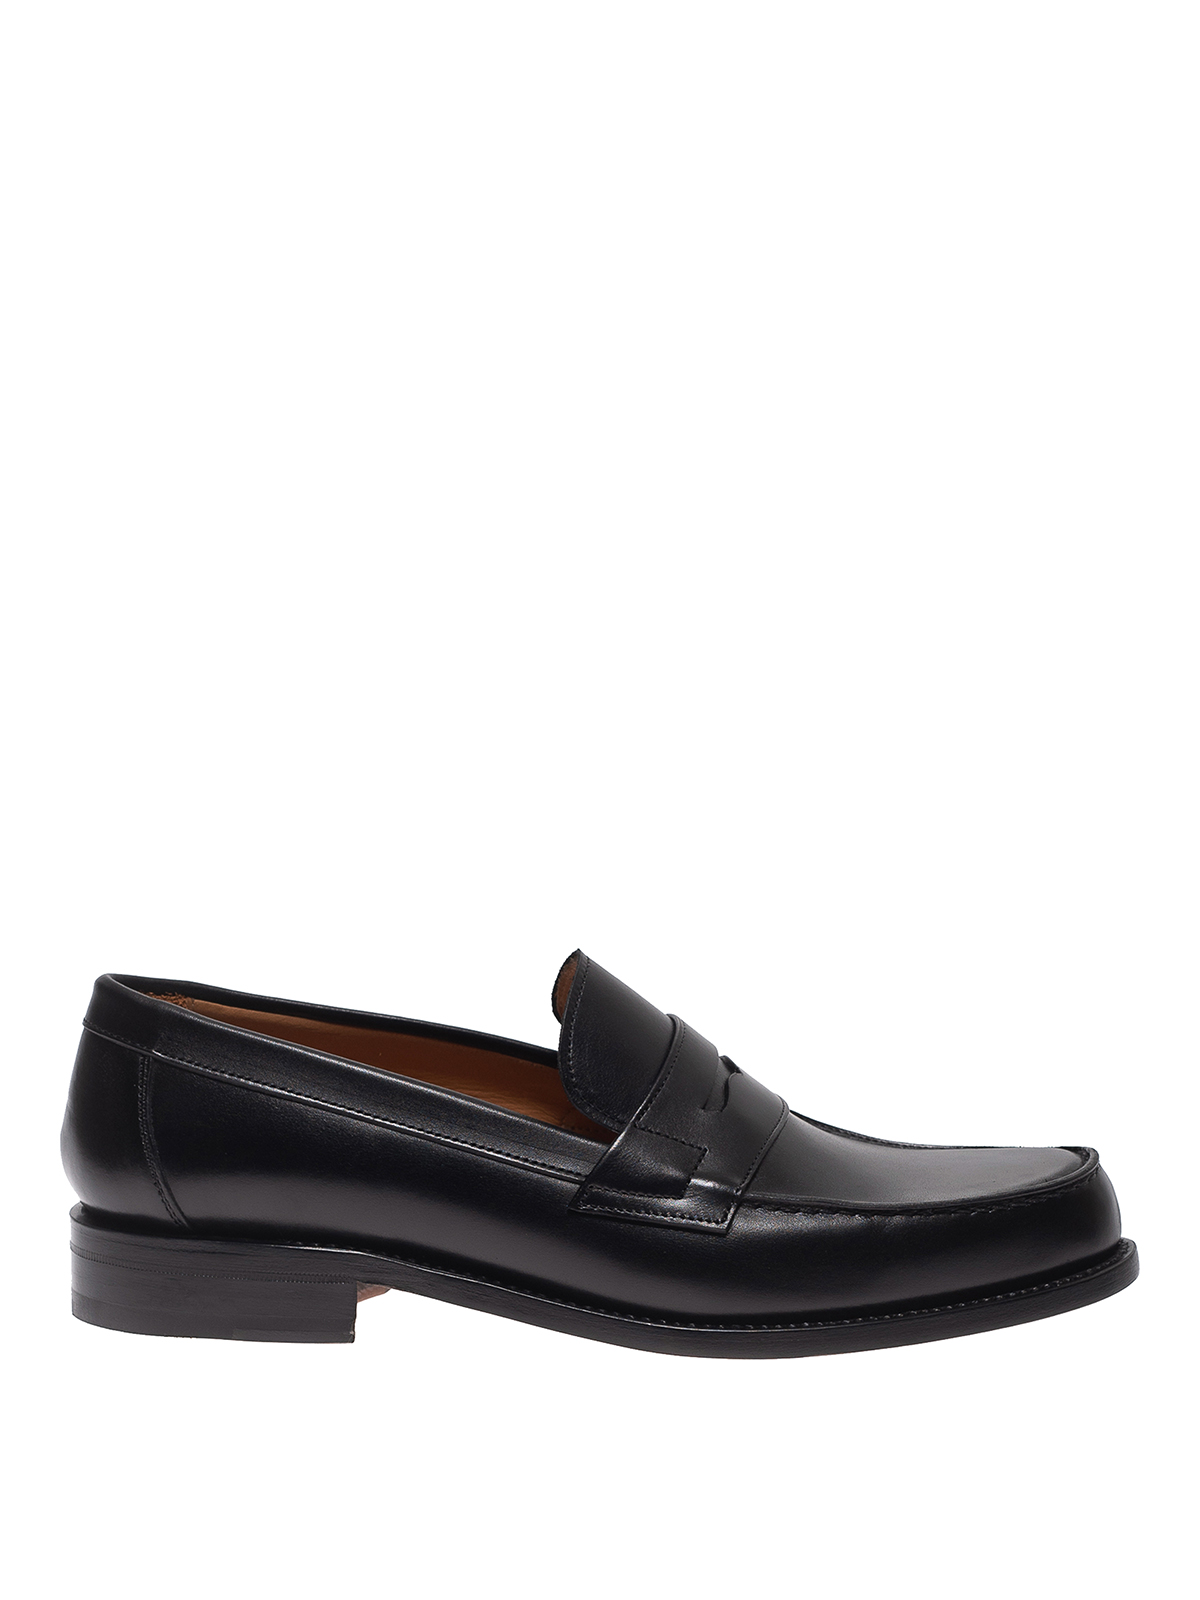 Loafers & Slippers Berwick 1707 - Leather classic loafers ...